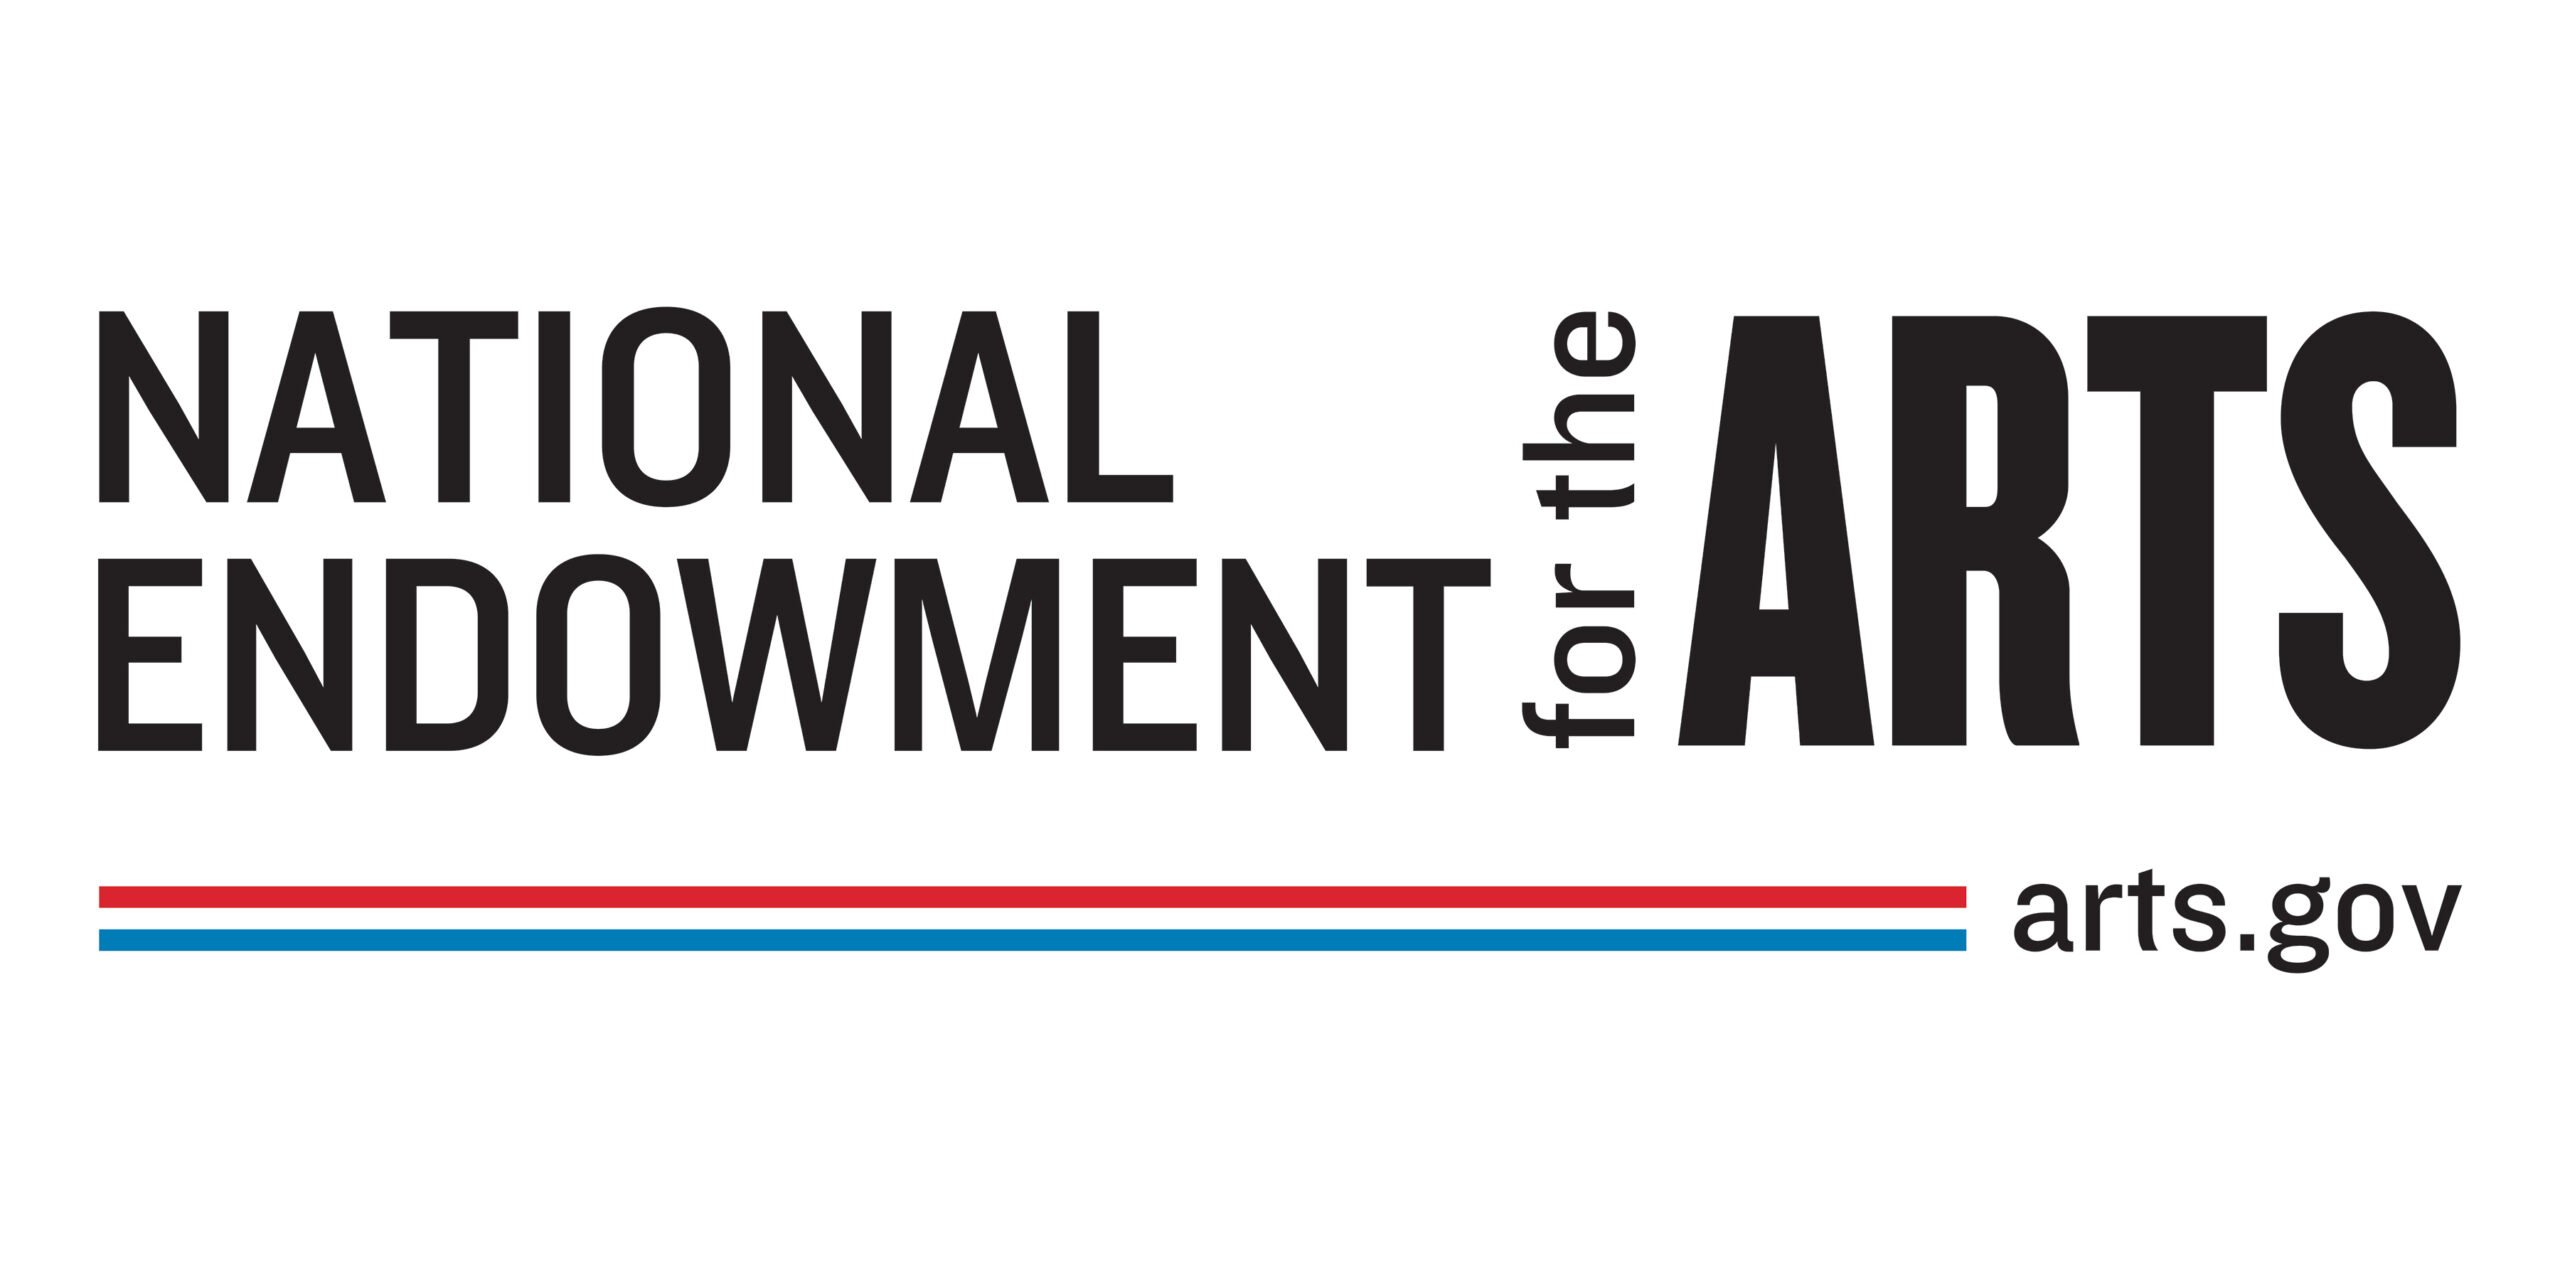 Logo of the National Endowment for the Arts, showing black text in a sans serif font above red and blue stripes